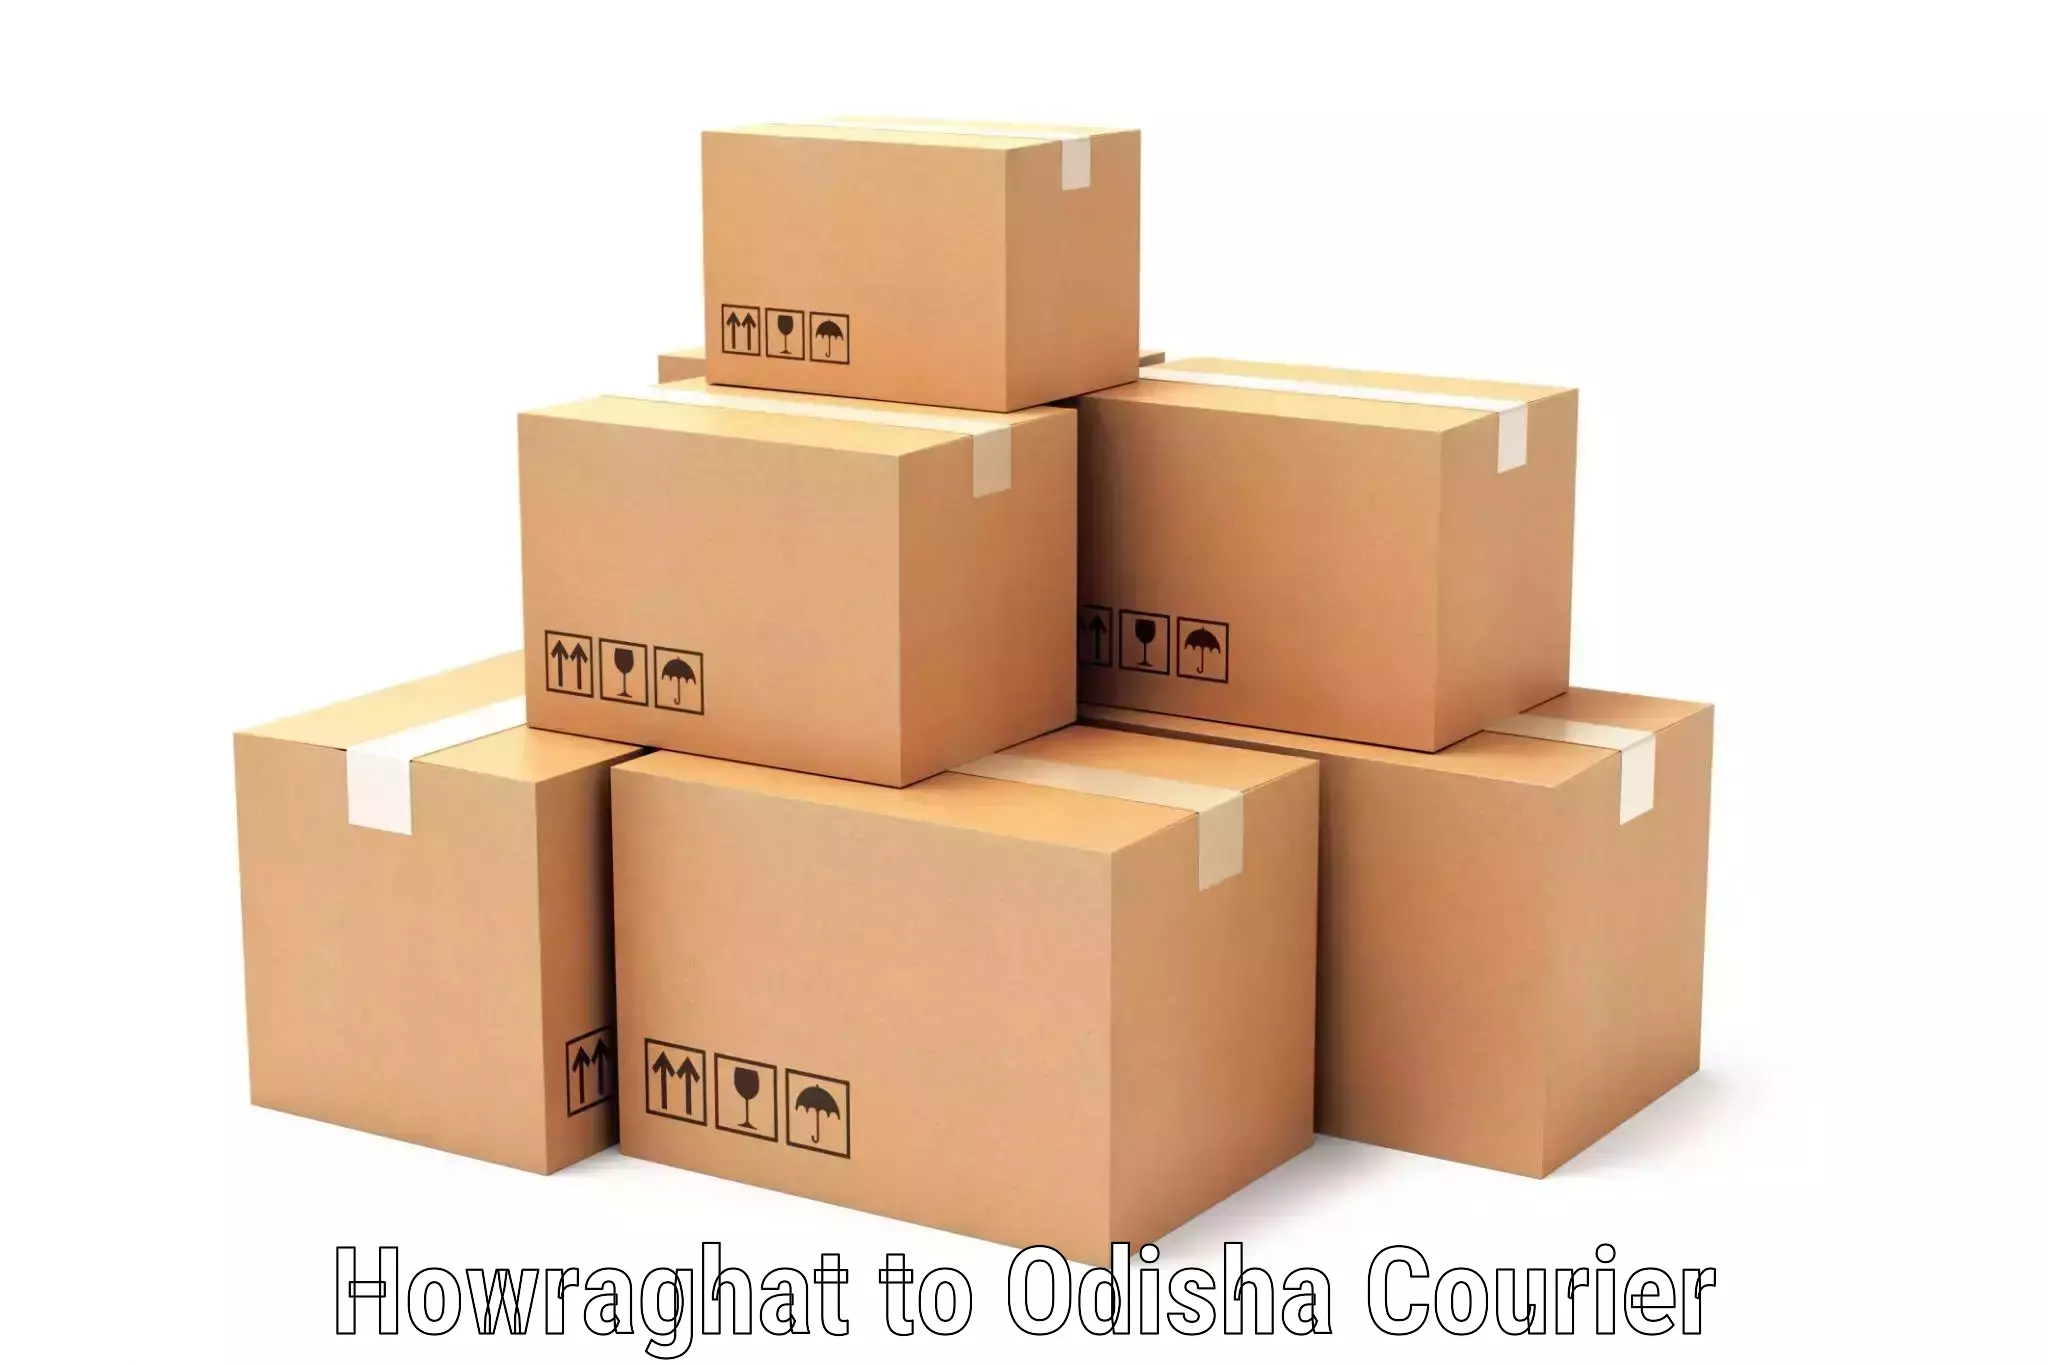 Optimized courier strategies Howraghat to Kandhamal